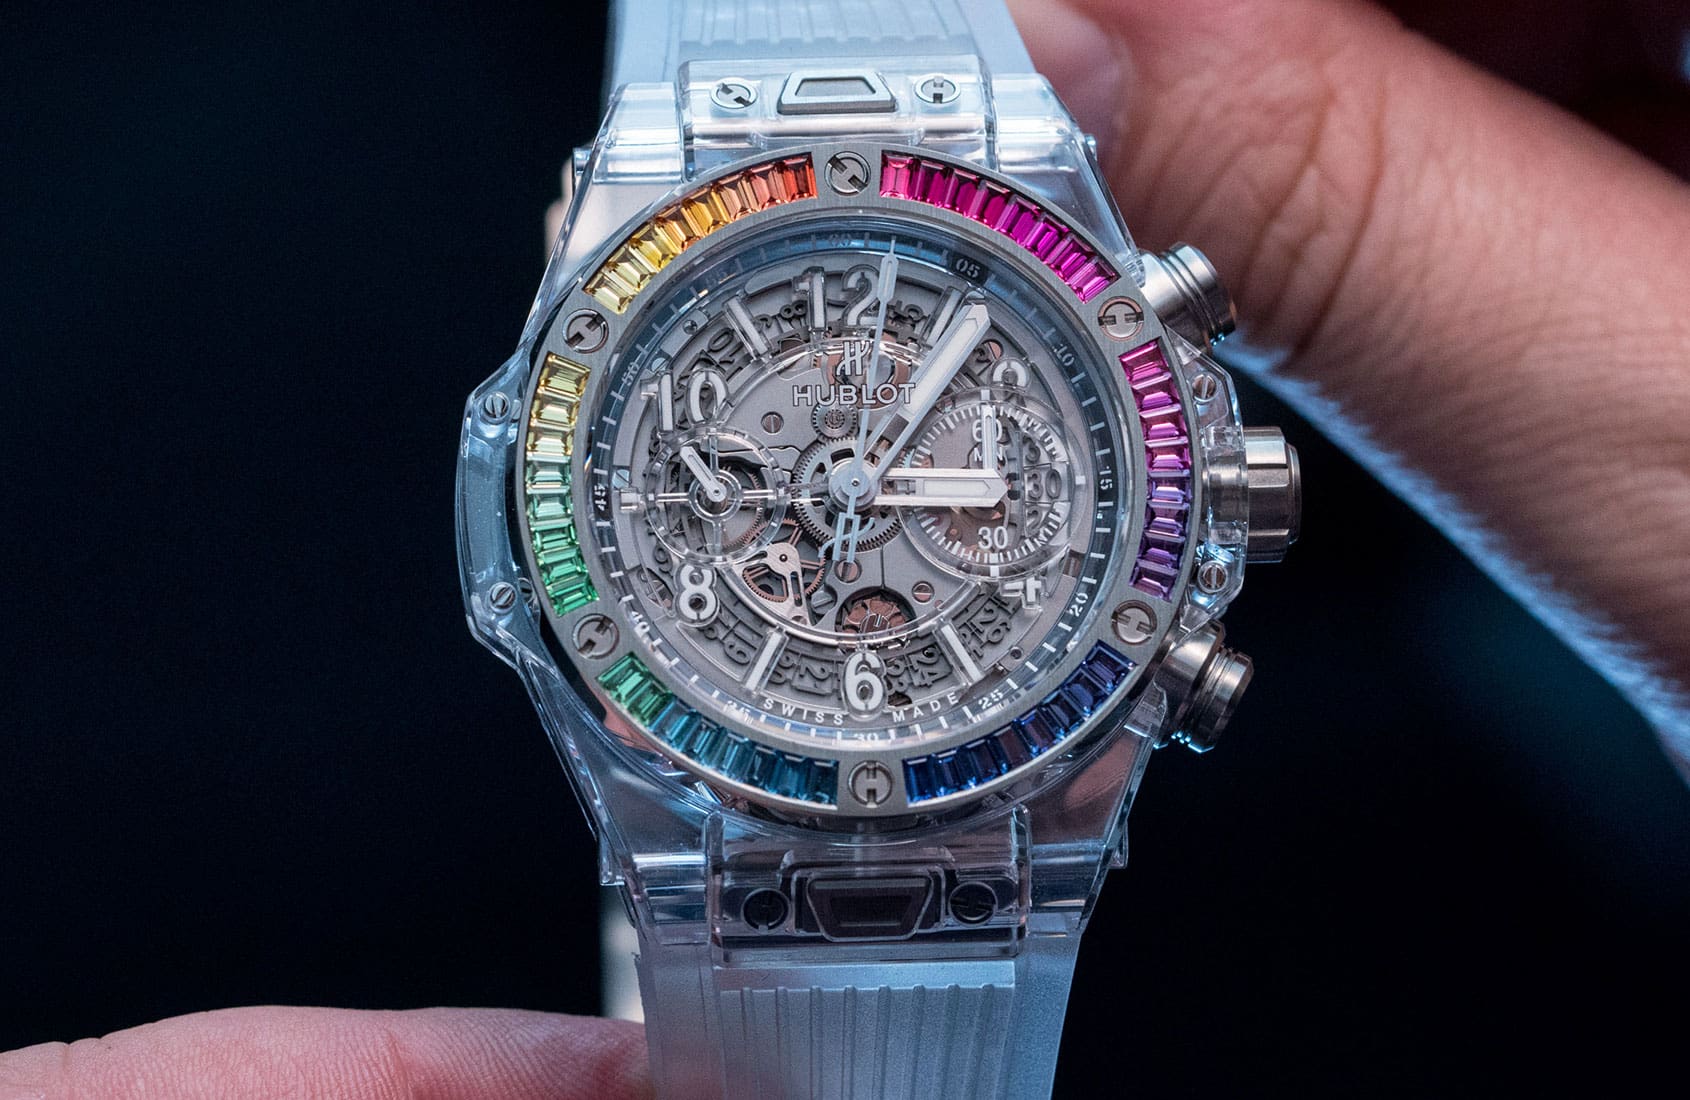 HANDS-ON: And now for something completely different – the Hublot Big Bang Rainbow Sapphire